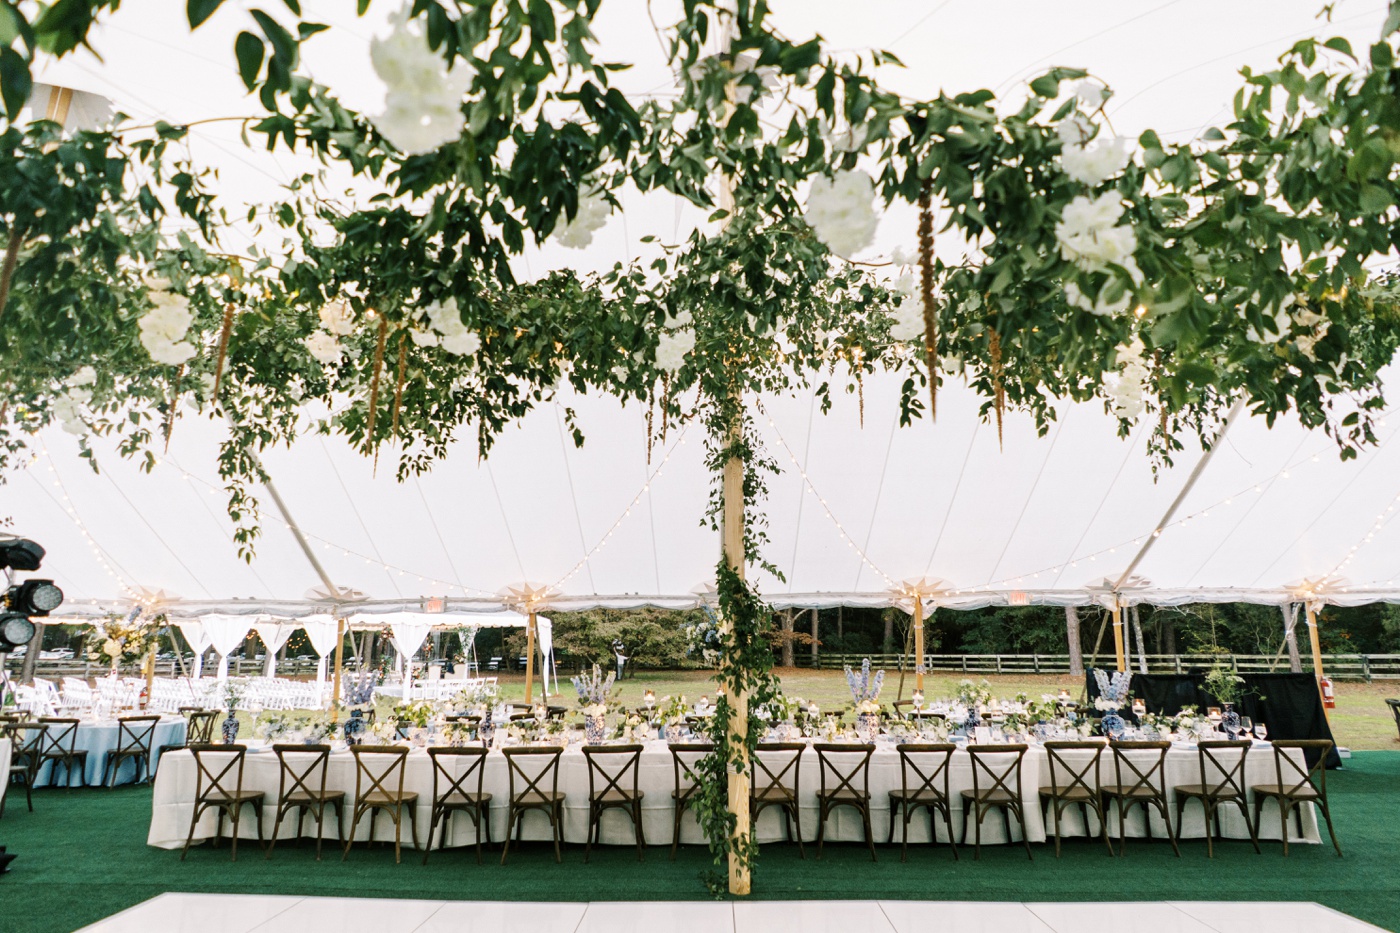 Outdoor tented reception featuring white tablecloths, Carolina blue napkins, and white and blue menus